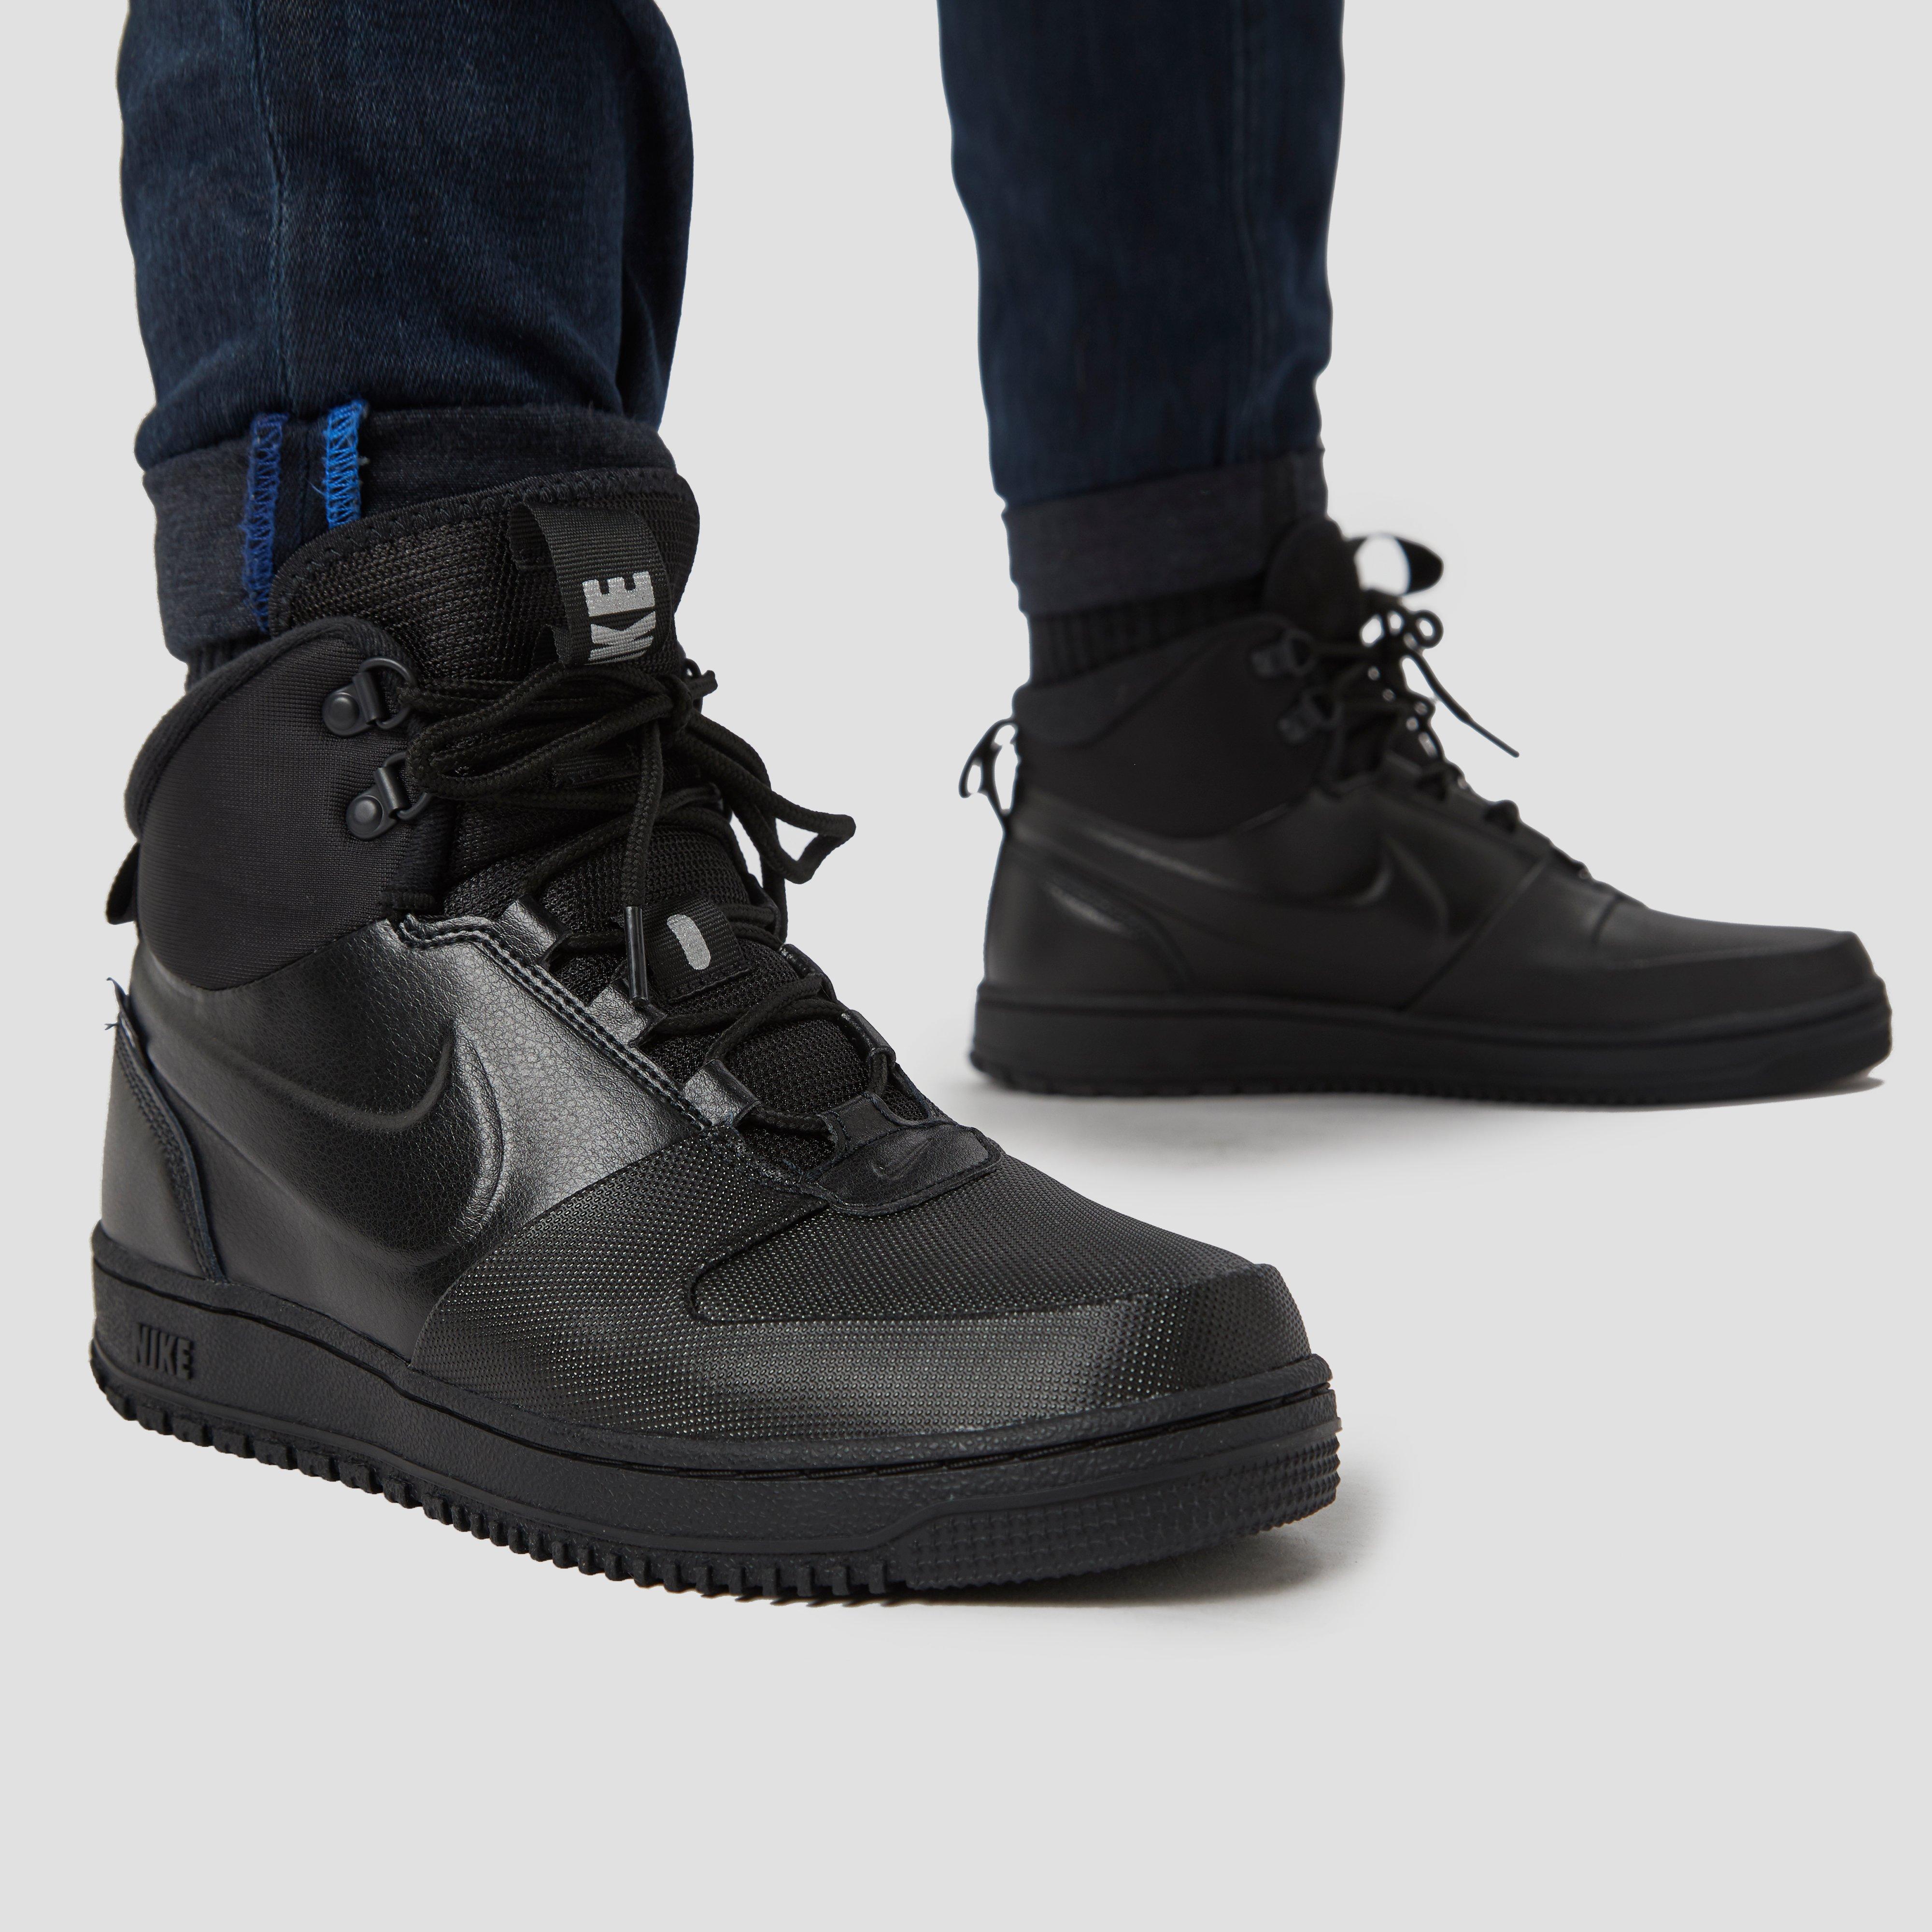 nike path winter boots